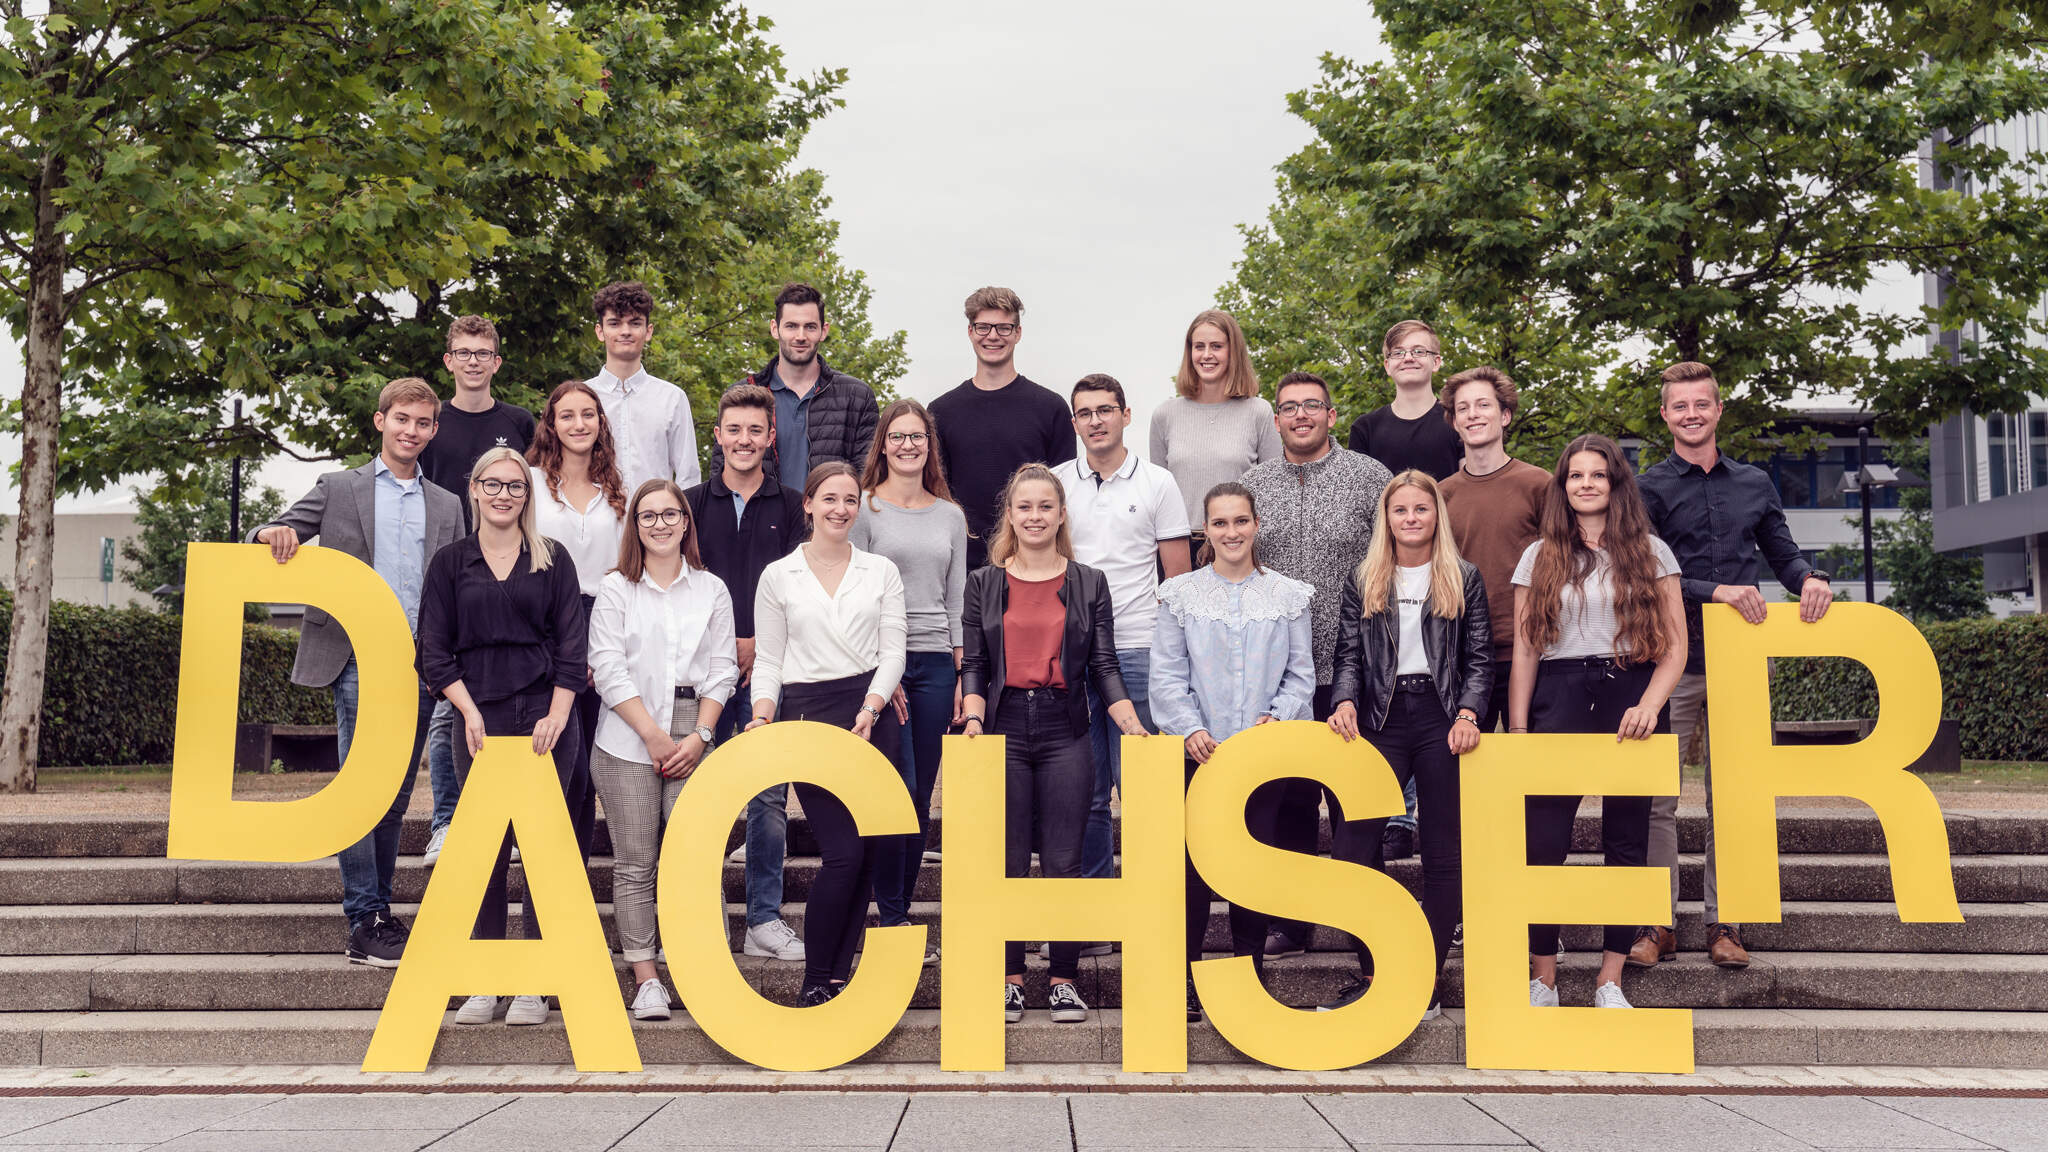 New students and trainees at DACHSER